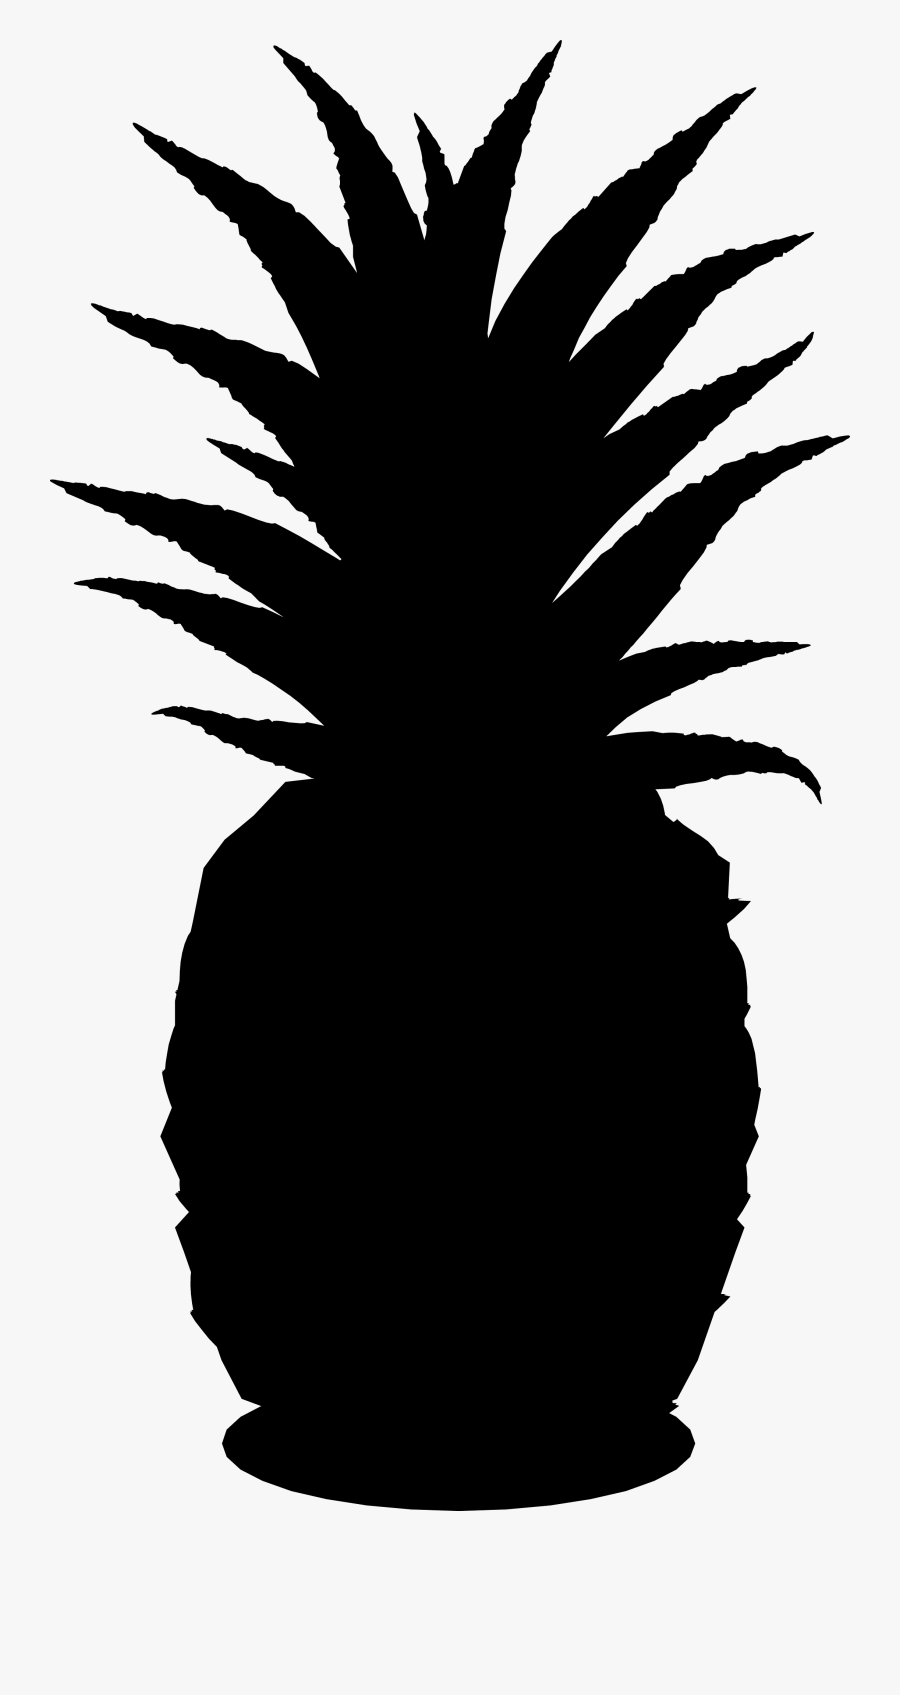 Pineapple Silhouette - Pineapple Png Black, Transparent Clipart